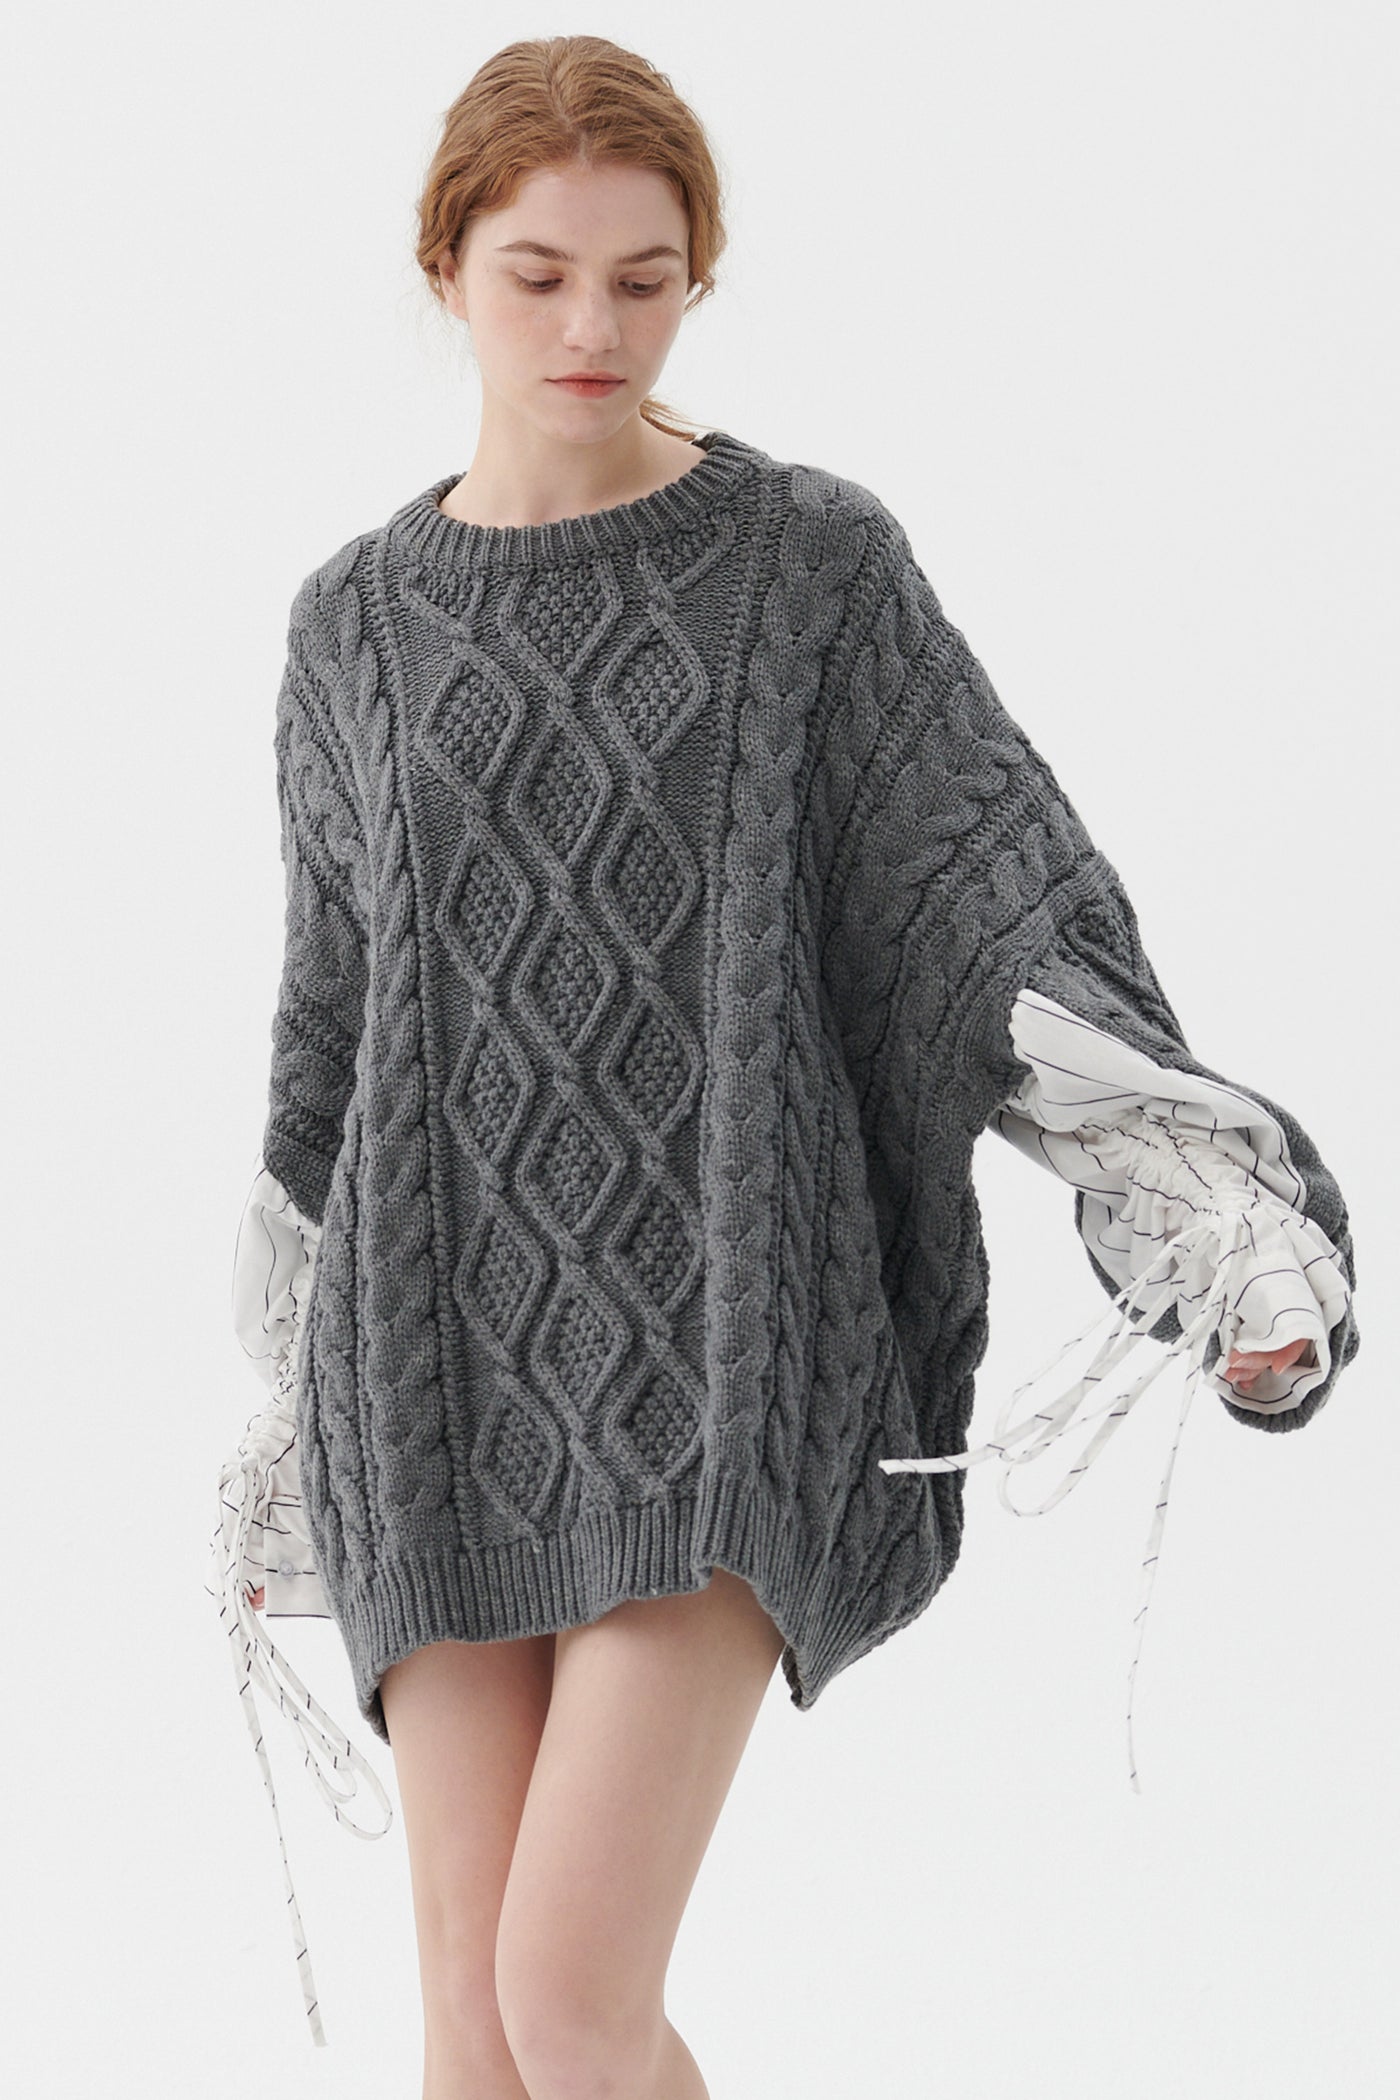 storets.com Sadie Shirt Combo Knit Pullover